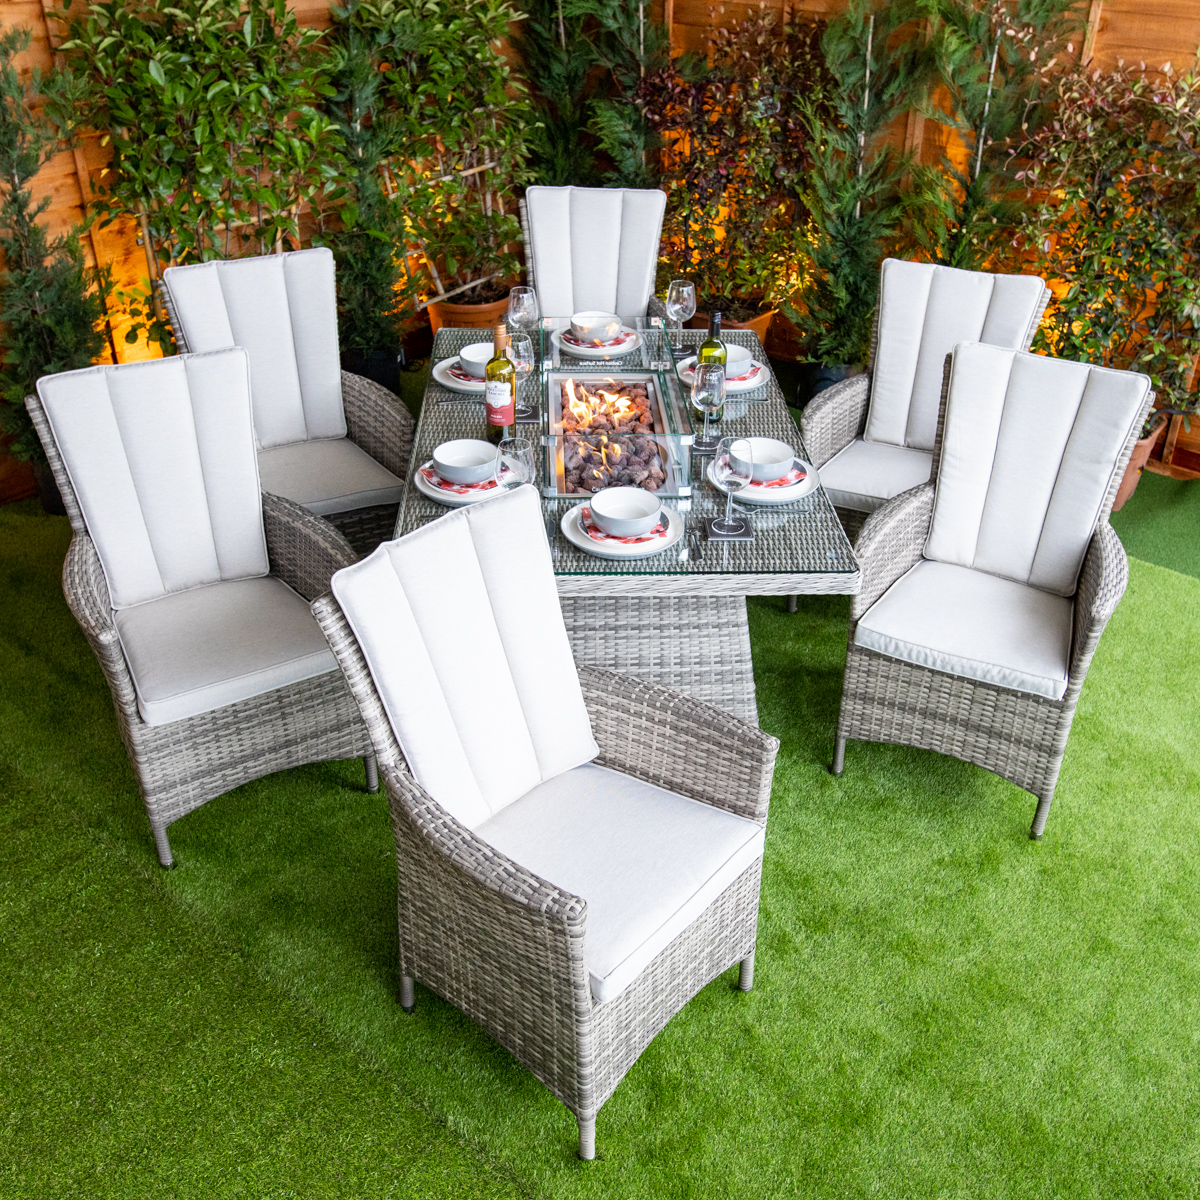 How Rattan Garden Furniture Can Enhance Your Mental Well-being